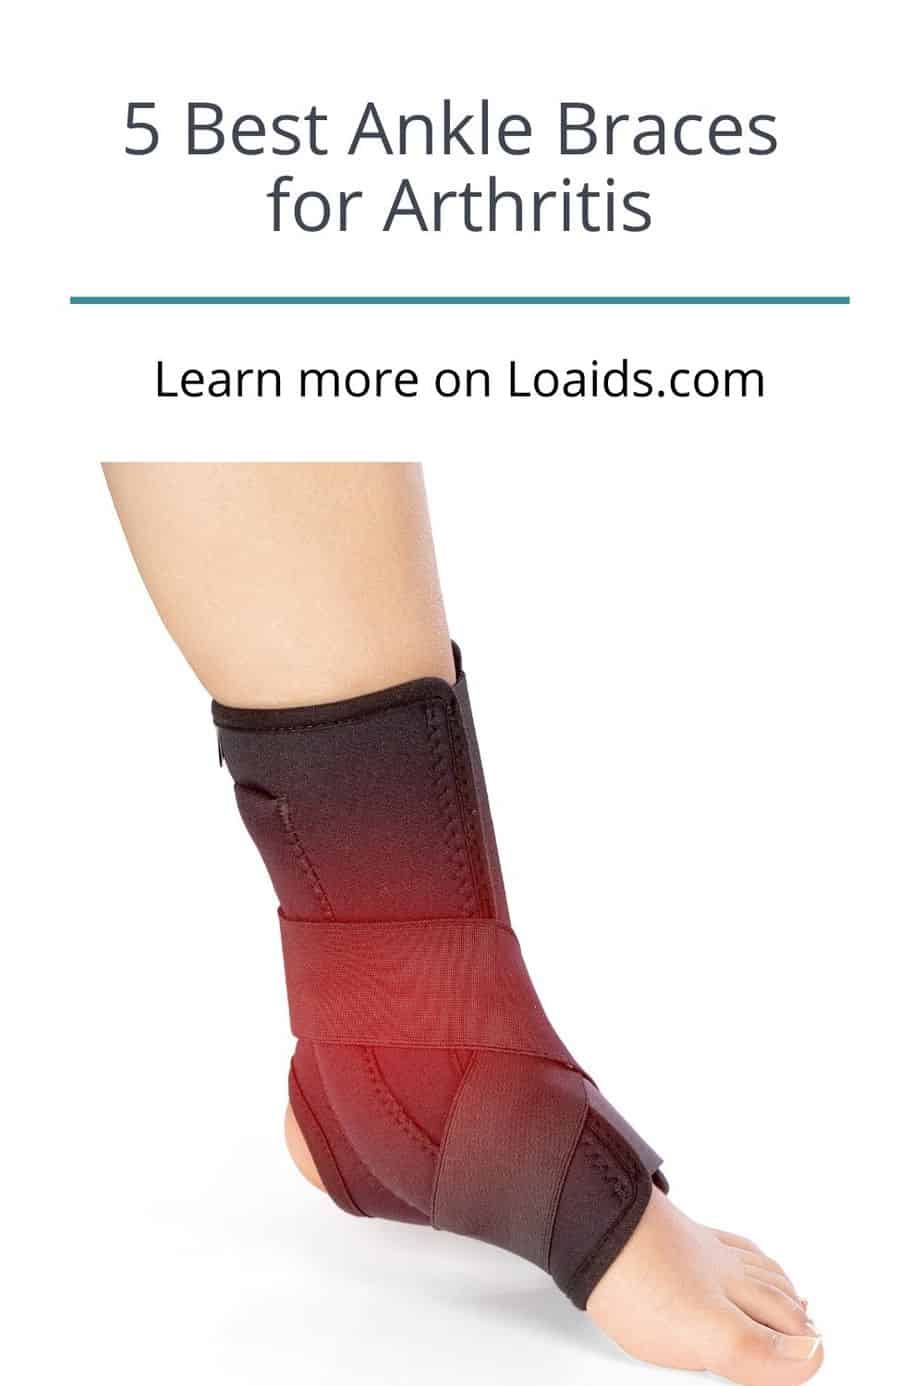 Tendonitis and Sprains Ankle Support for Swelling Inflammation McDavid Foot & Ankle Brace Stabilizer Arthritis Bursitis